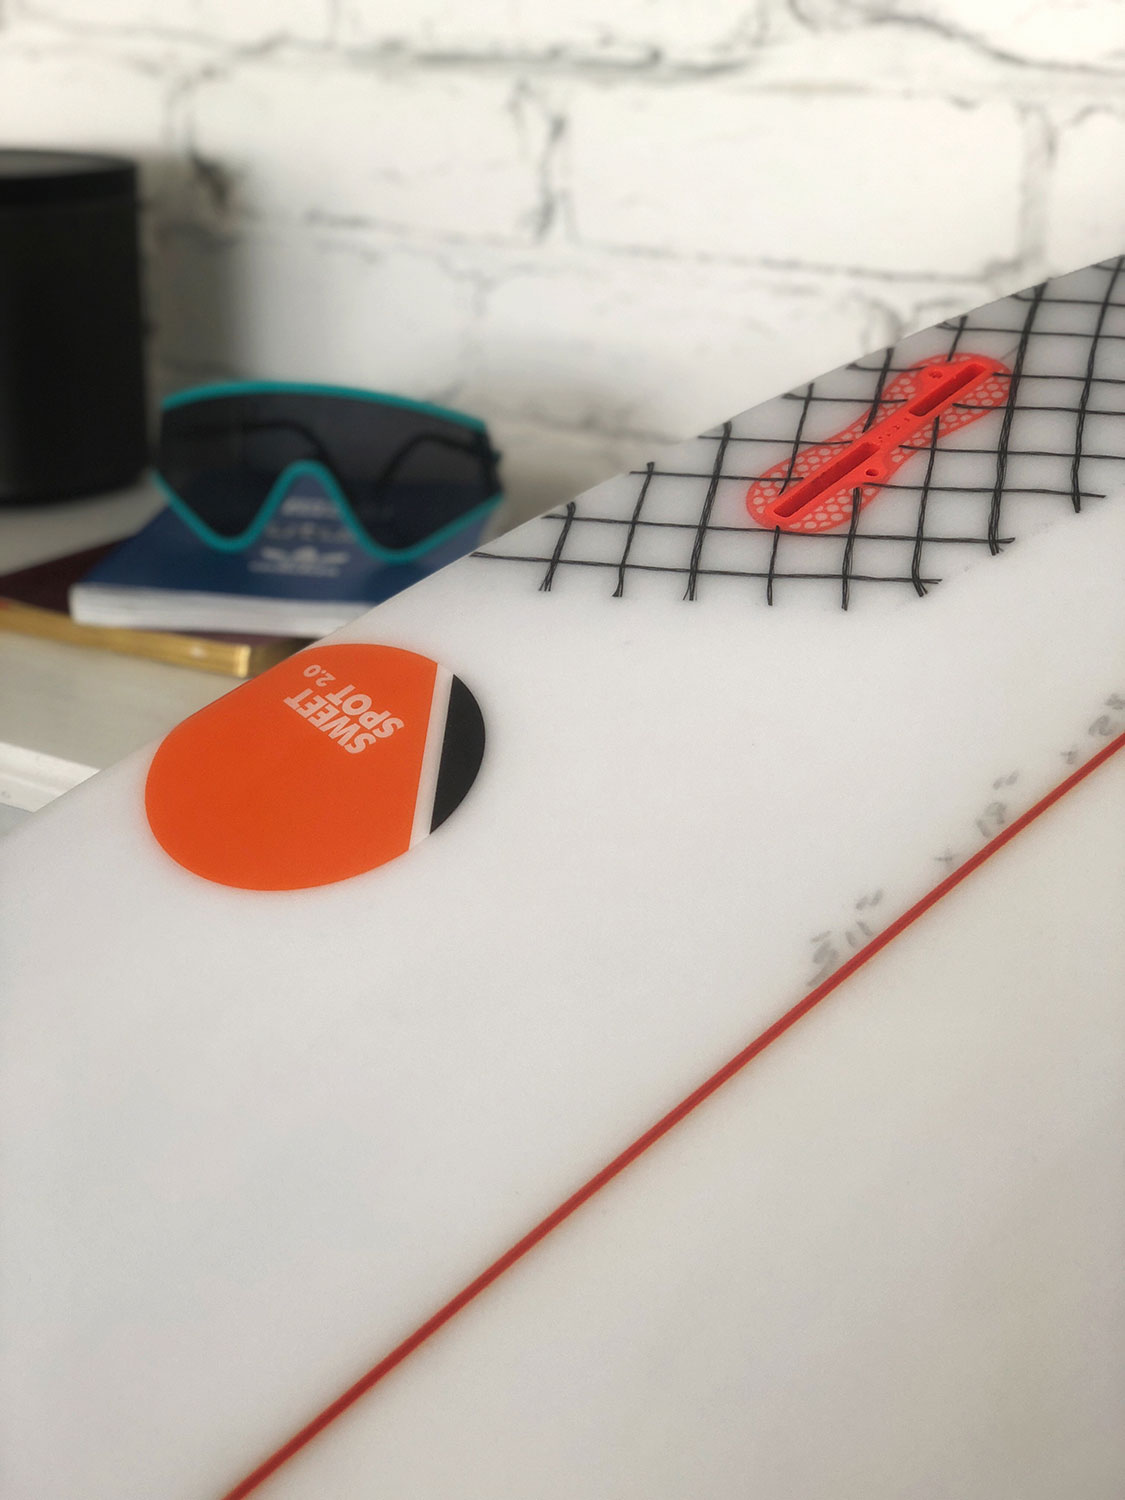 DHD Sweet Spot 2.0 Surfboard Review